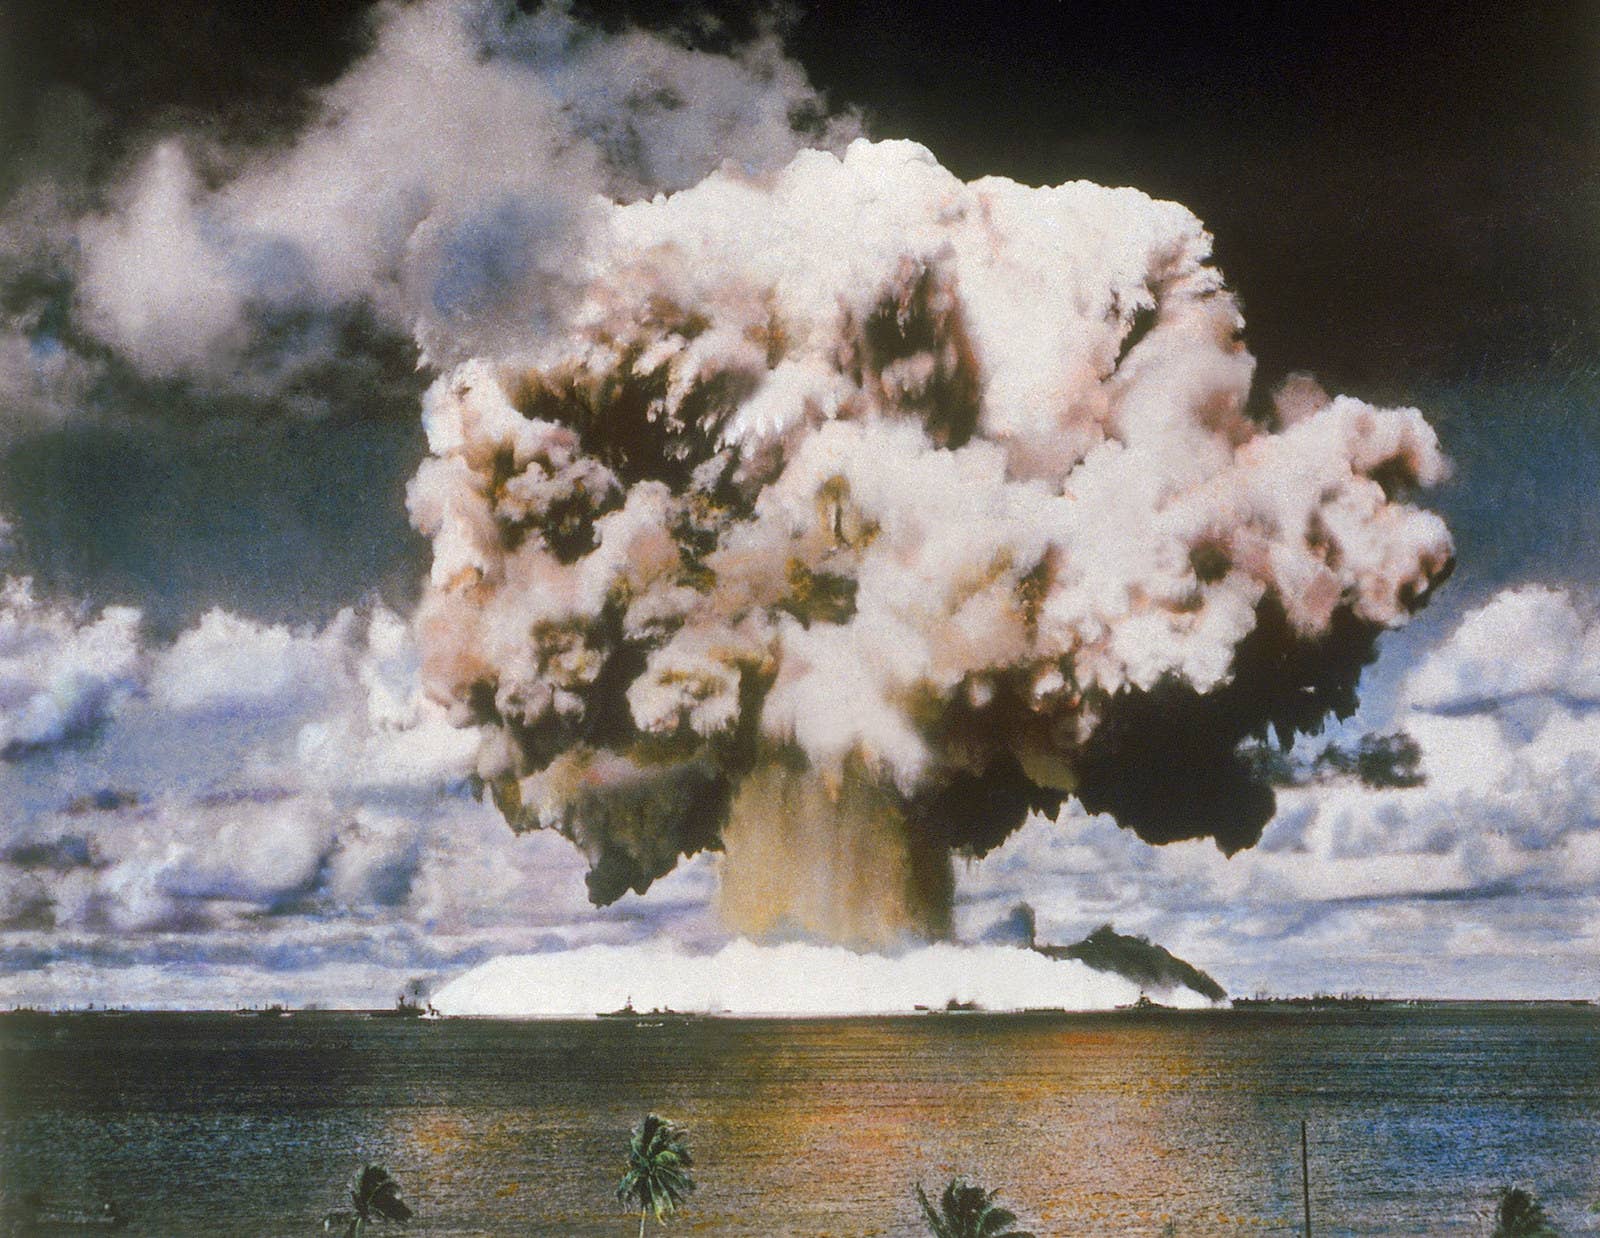 The United States tests an atomic bomb above the Bikini Atoll in the Marshall Islands in 1946.